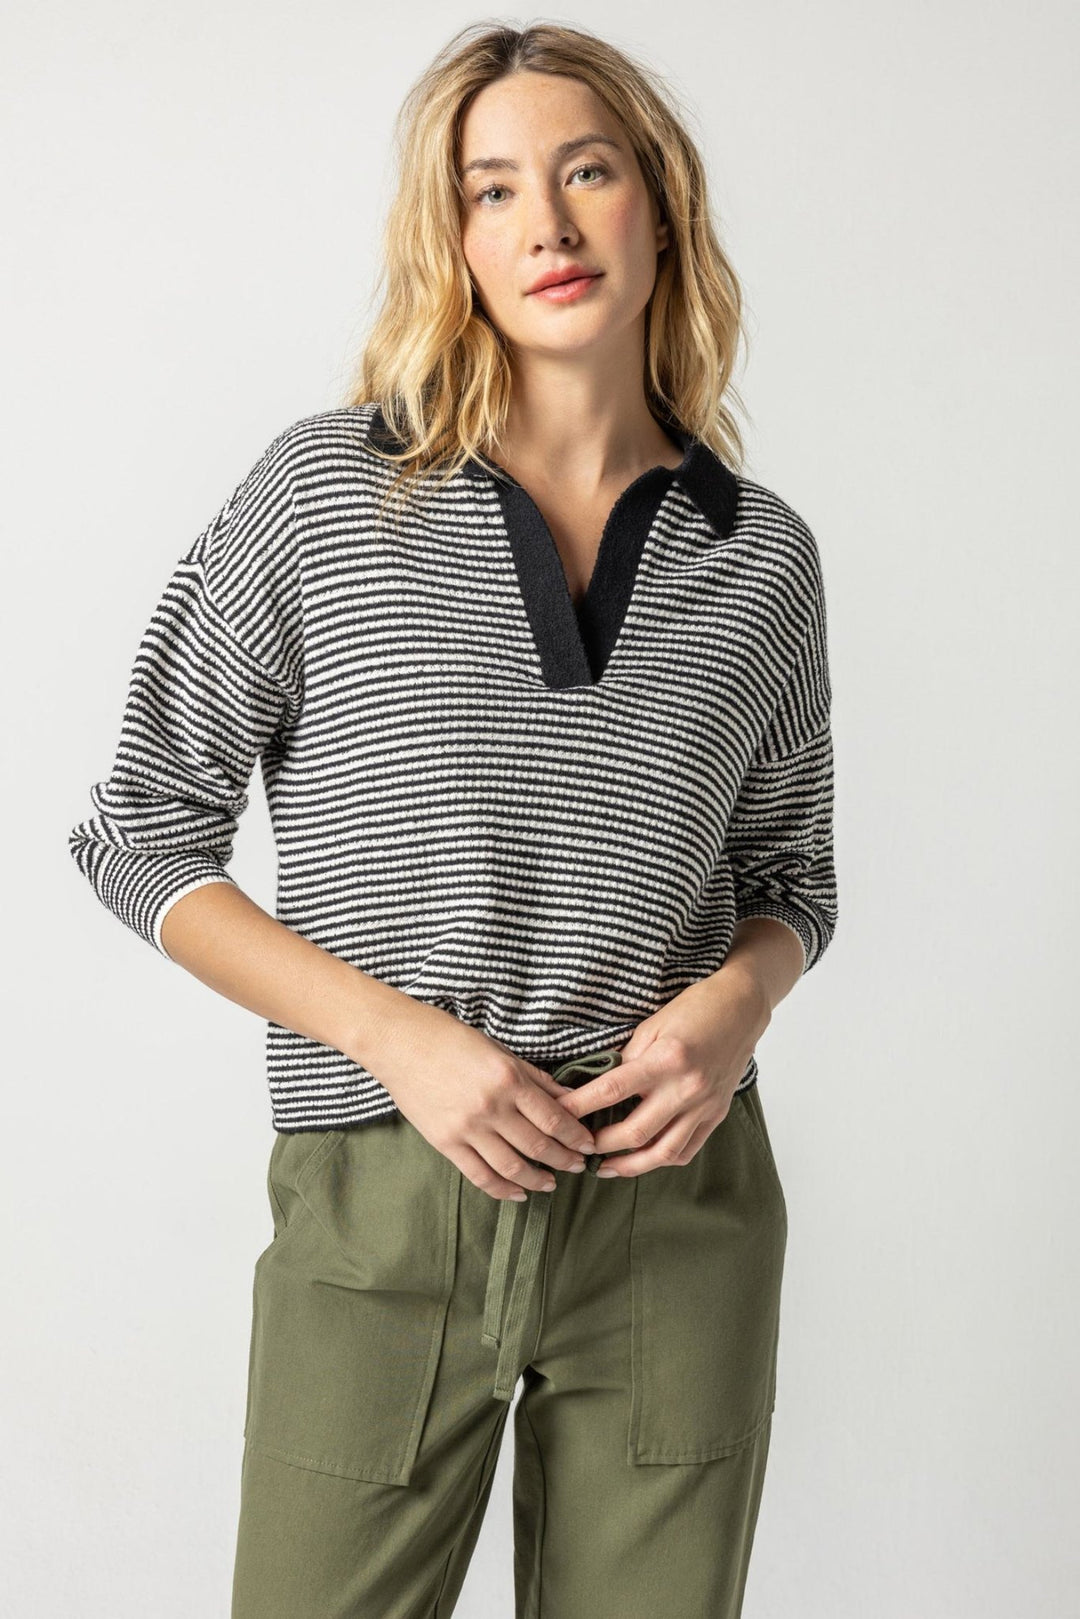 Lilla P - Relaxed 3/4 Slv Polo Stripe Sweater: Blk/Ivory - Shorely Chic Boutique